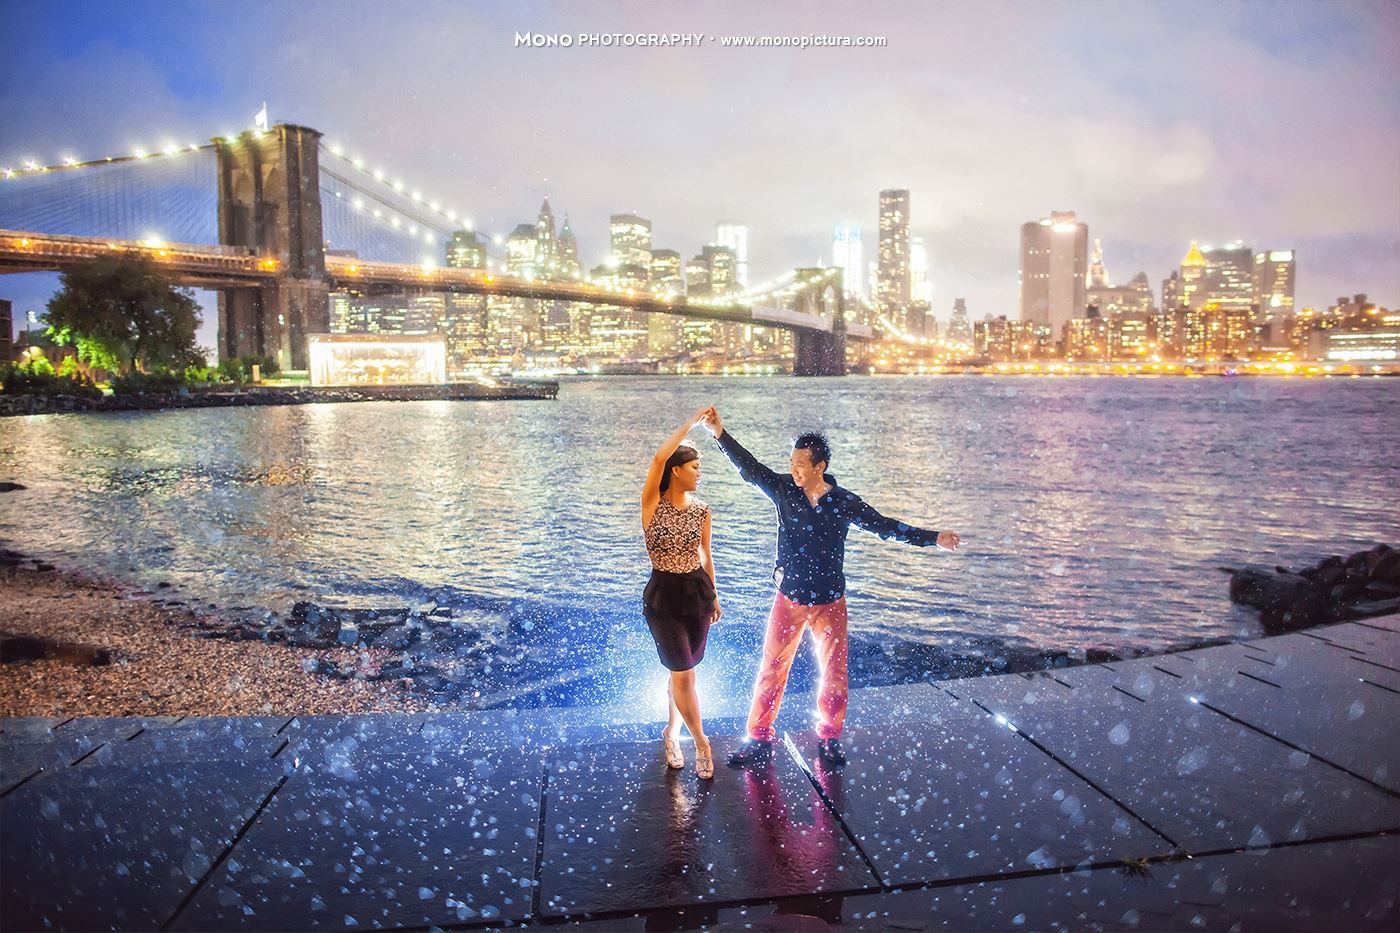 Oh So Romantic! This is the kind of engagement photo that will linger with you for awhile 